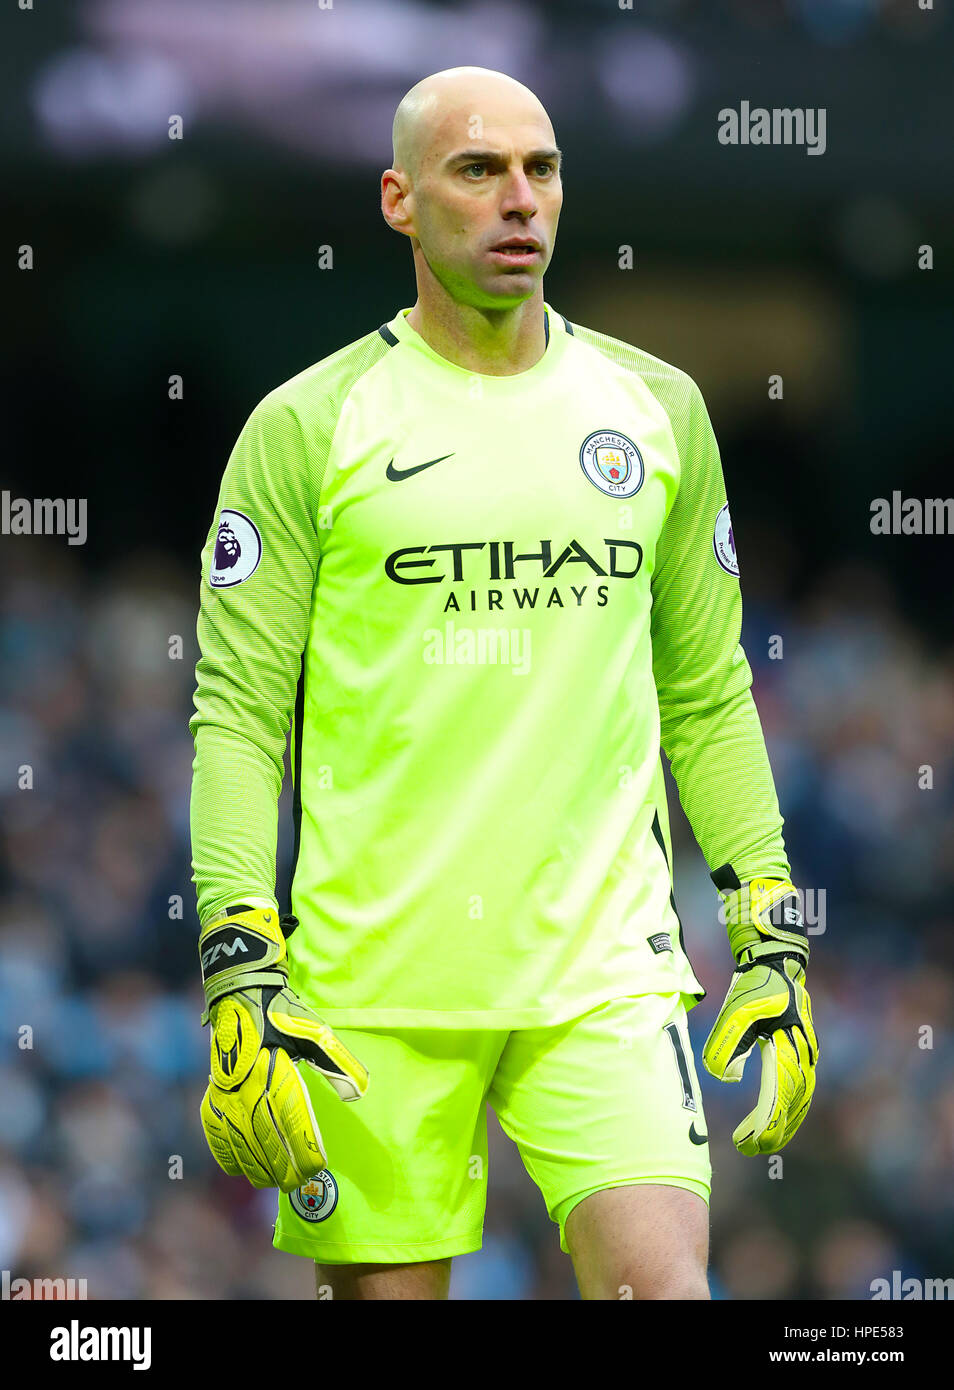 Manchester City il portiere Willy Caballero Foto stock - Alamy